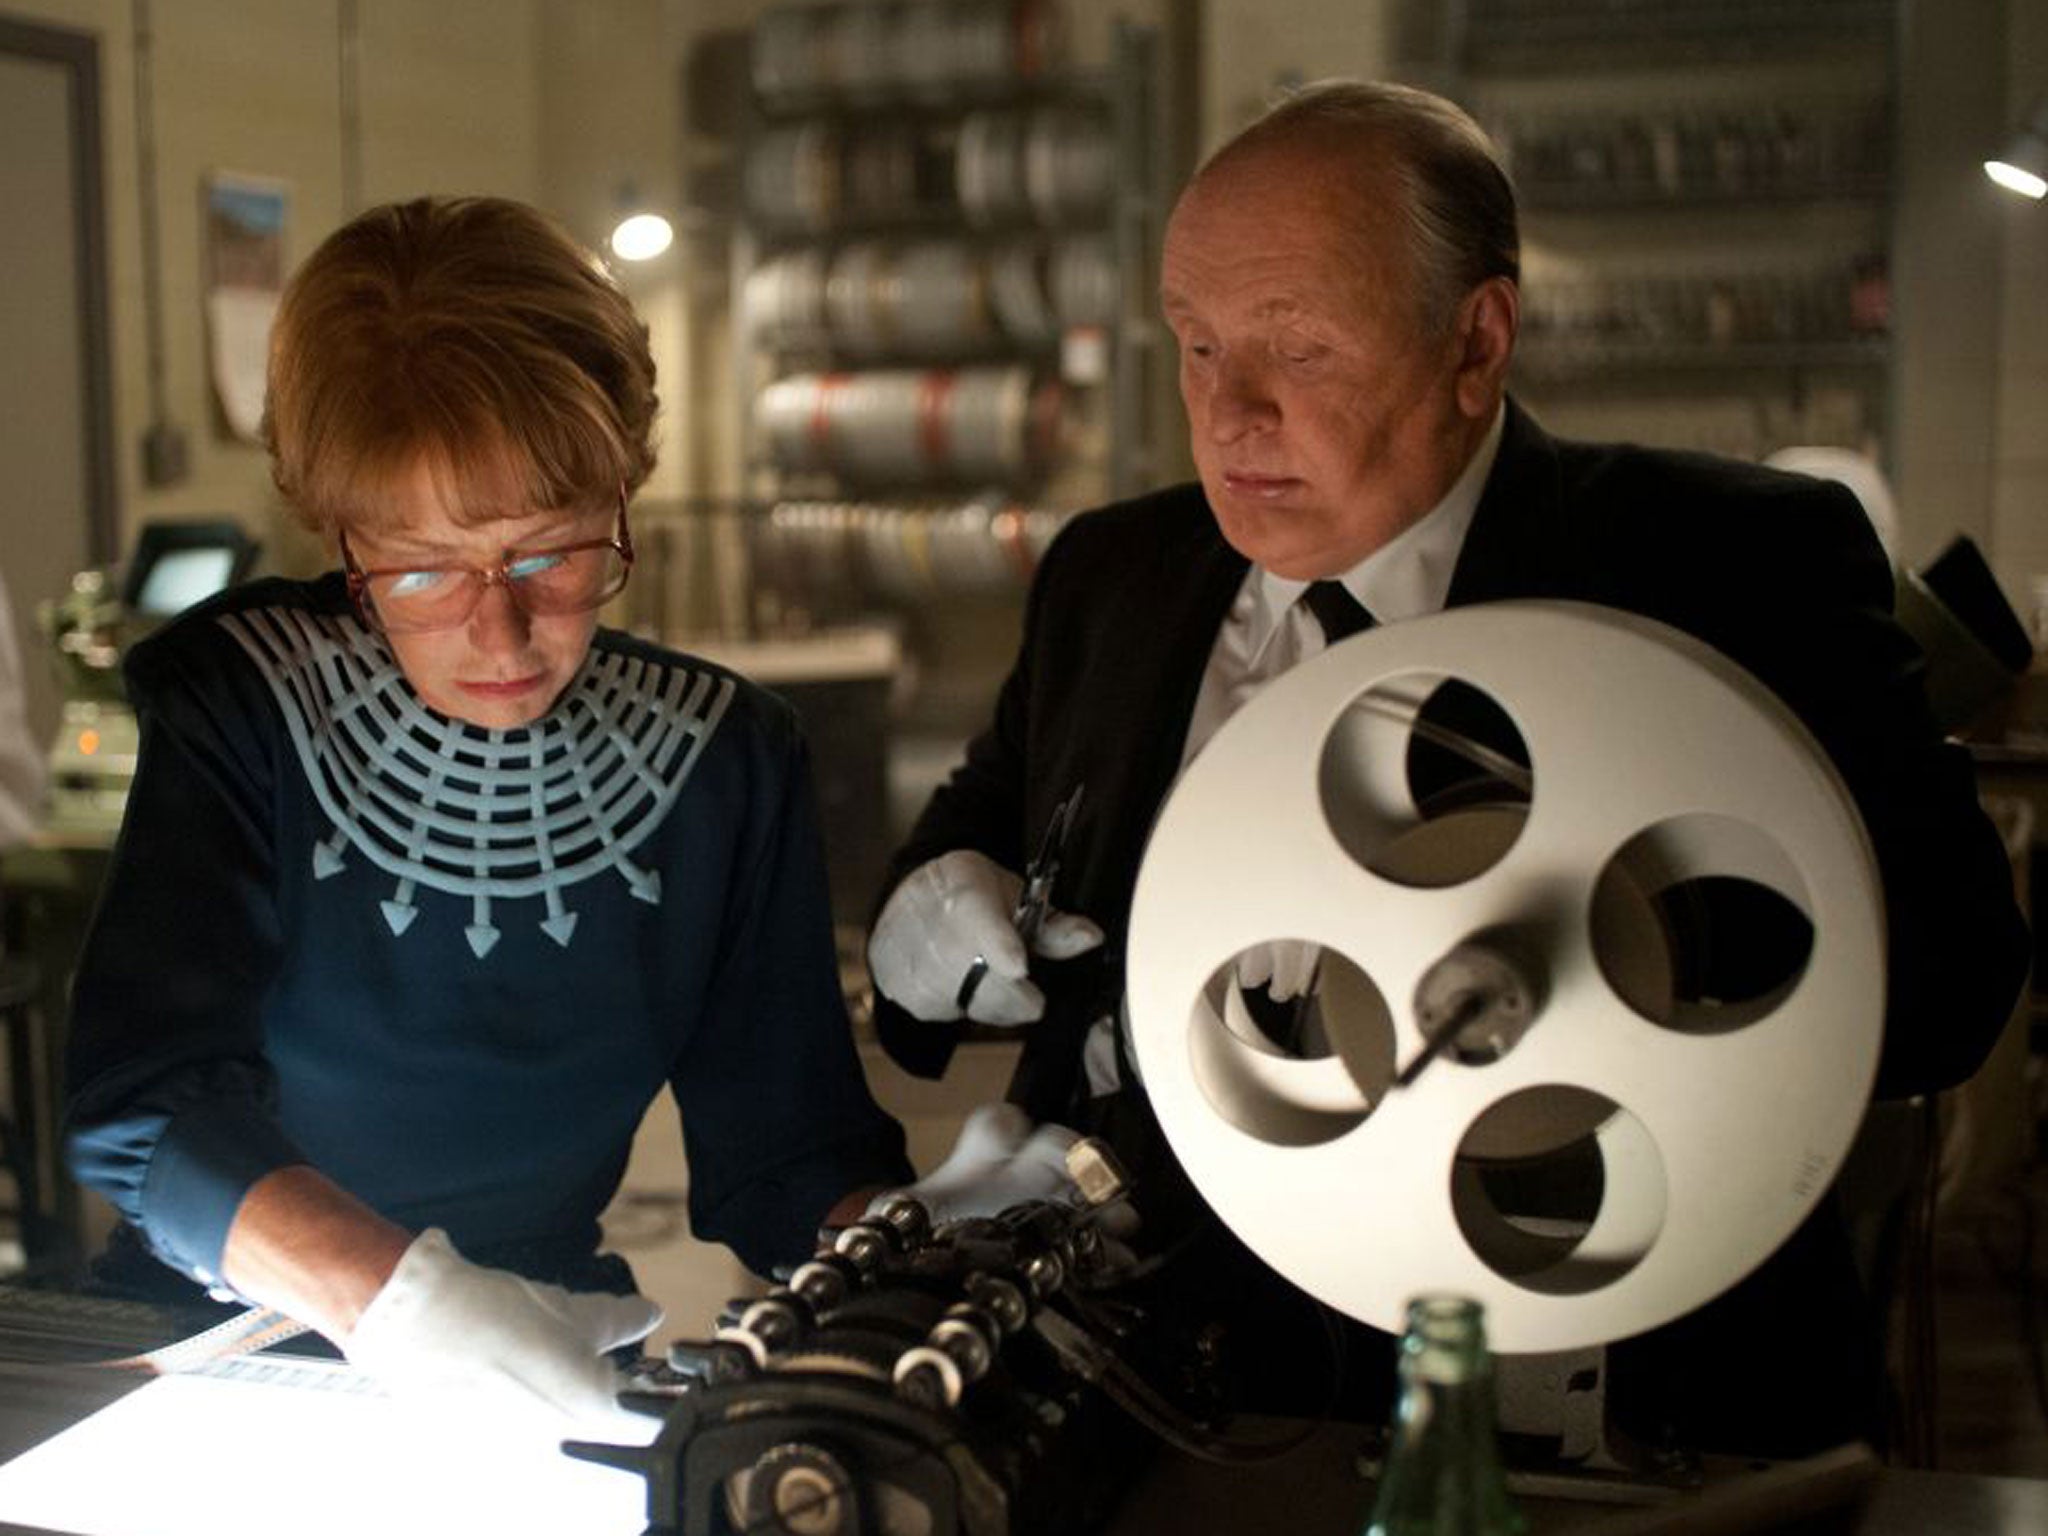 Publicity still from Hitchcock (2012), directed by Sacha Gervasi. Helen Mirren stars as Alma Hitchcock, opposite Anthony Hopkins as her husband, the director Alfred Hitchcock.